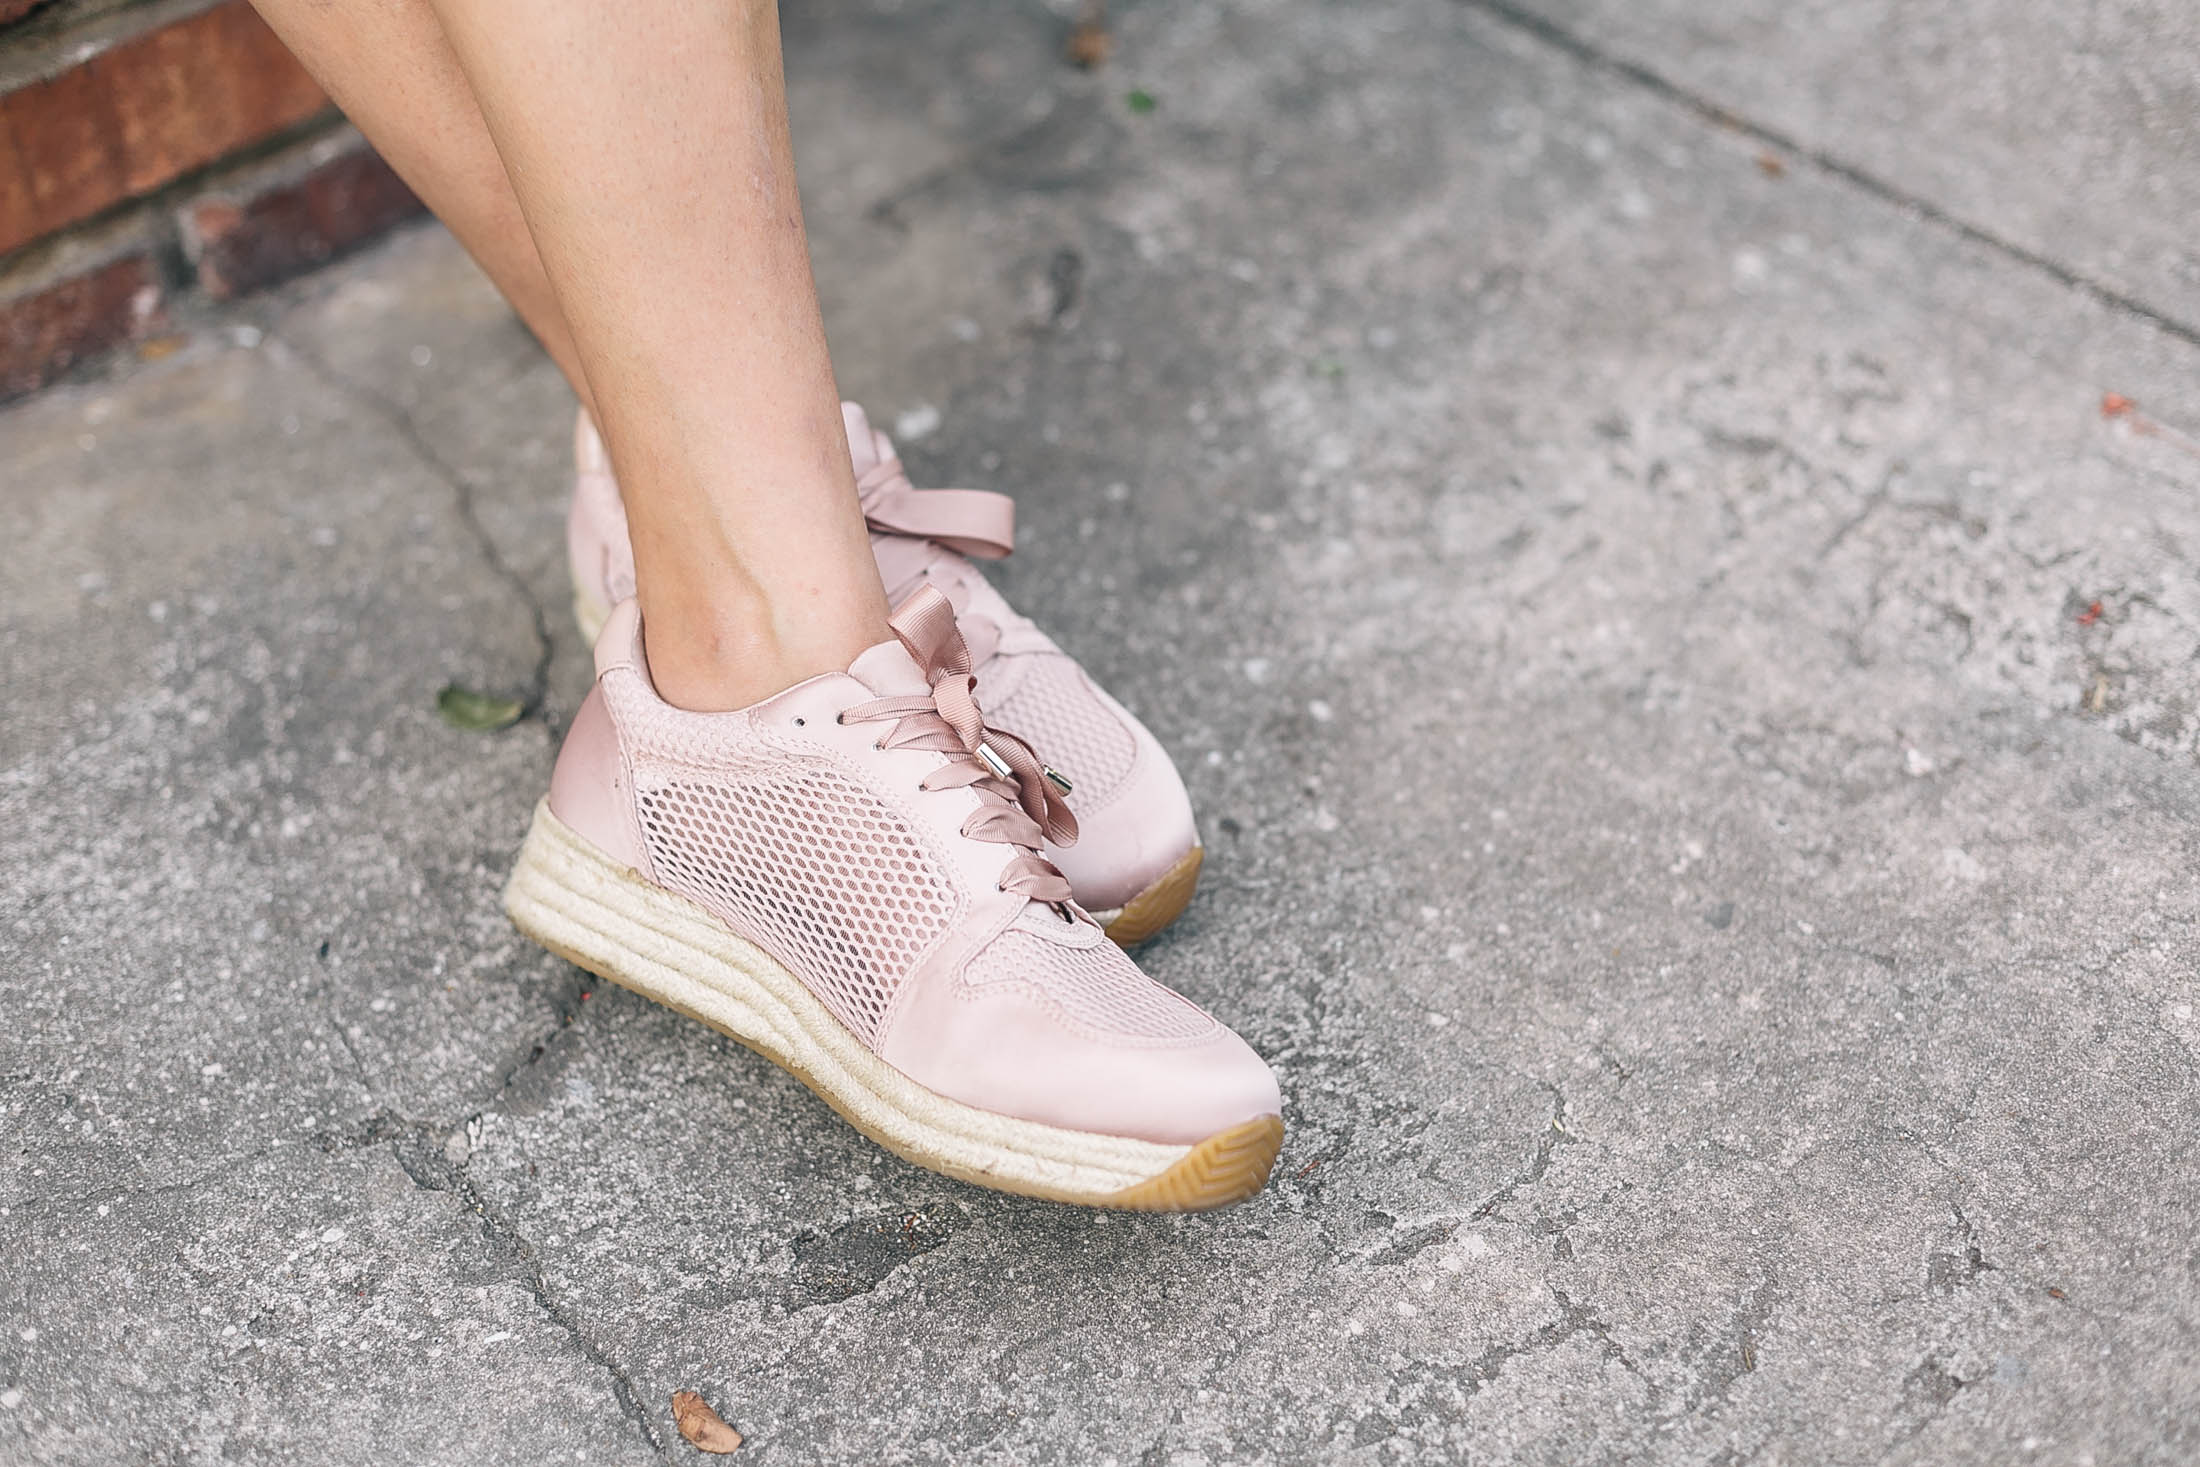 Air Max Thea style pink sneakers by Stradivarus